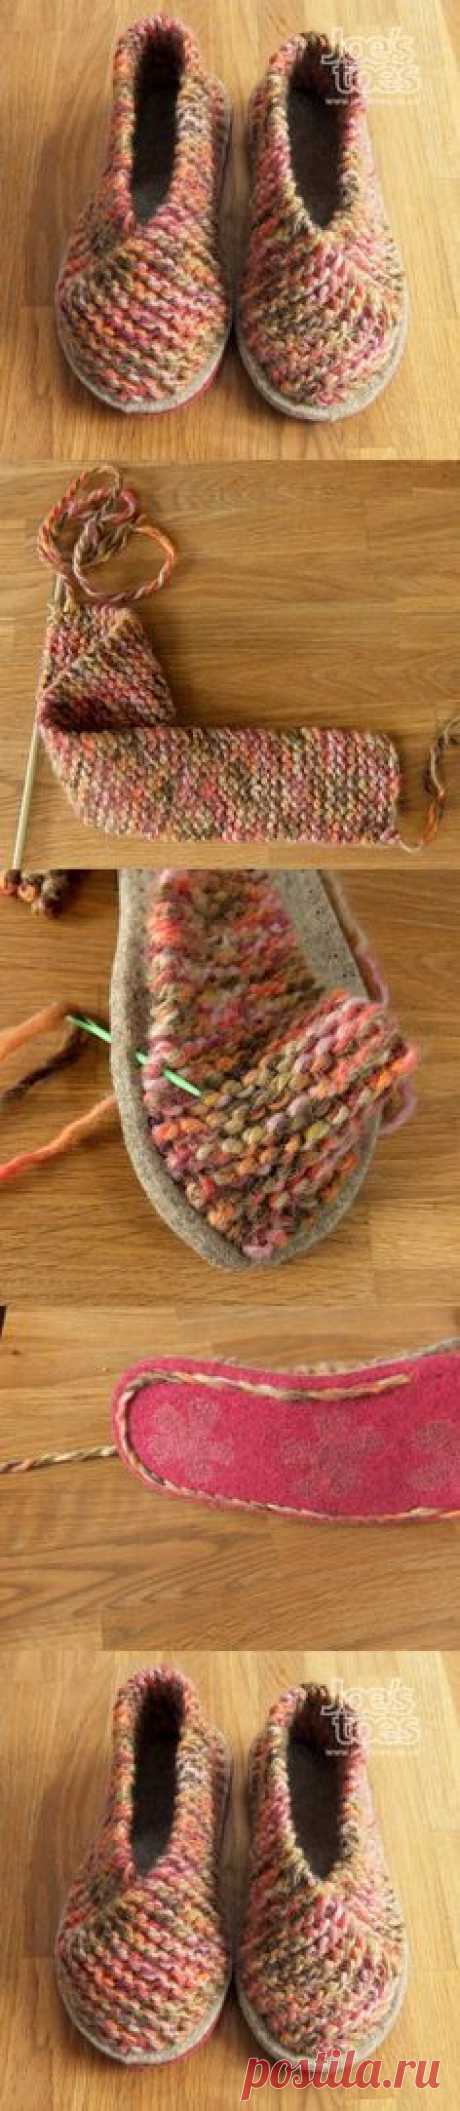 How to make knitted